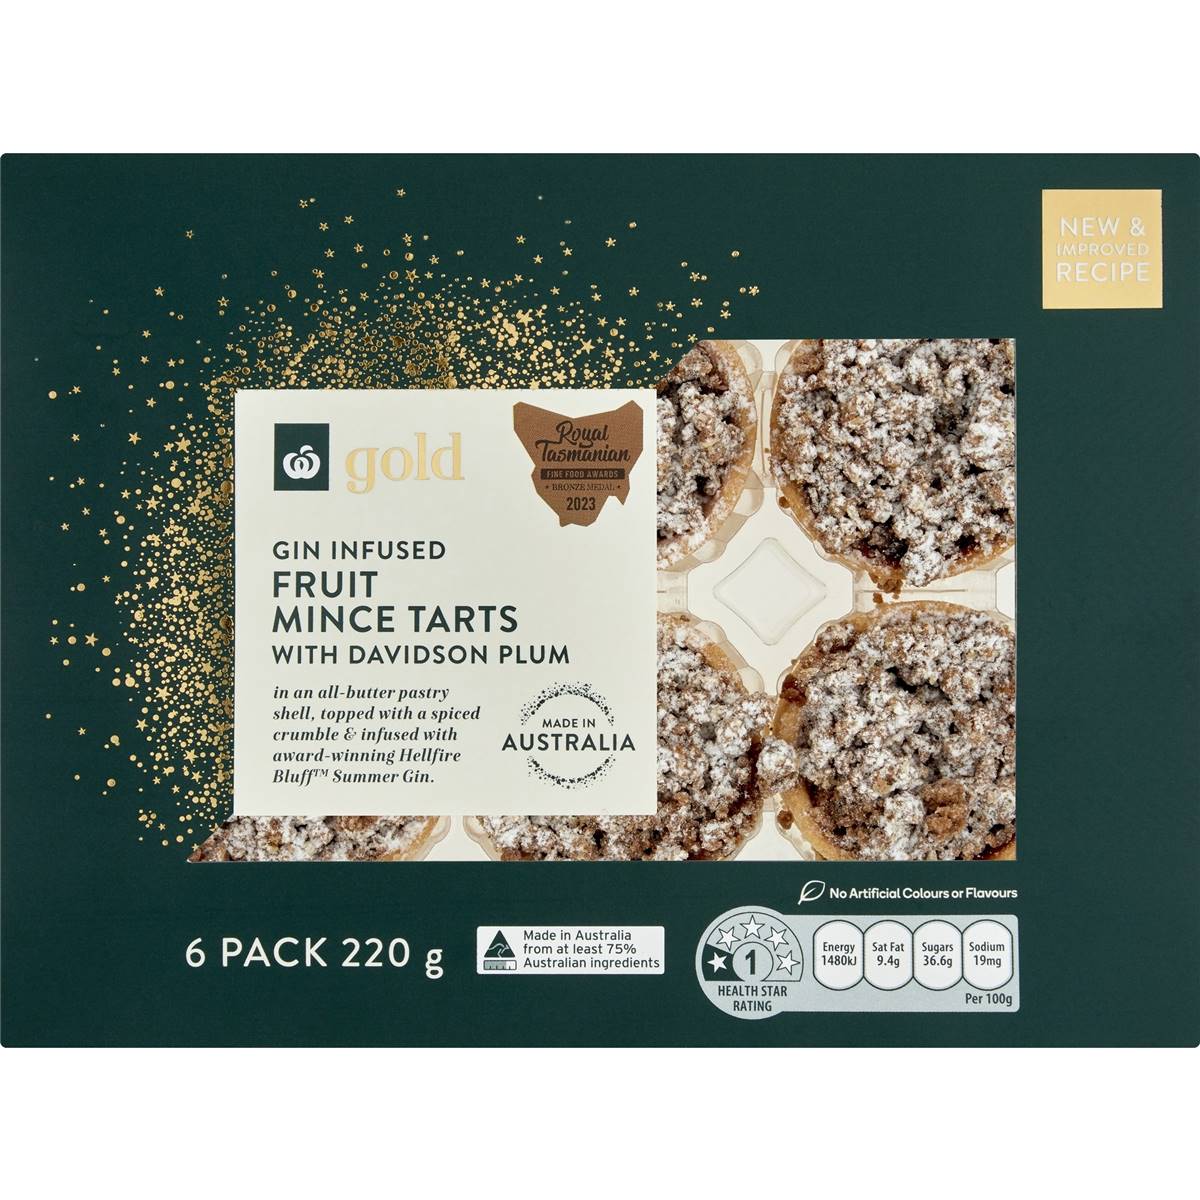 Calories in Woolworths Gold Gin Infused Fruit Mince Tarts